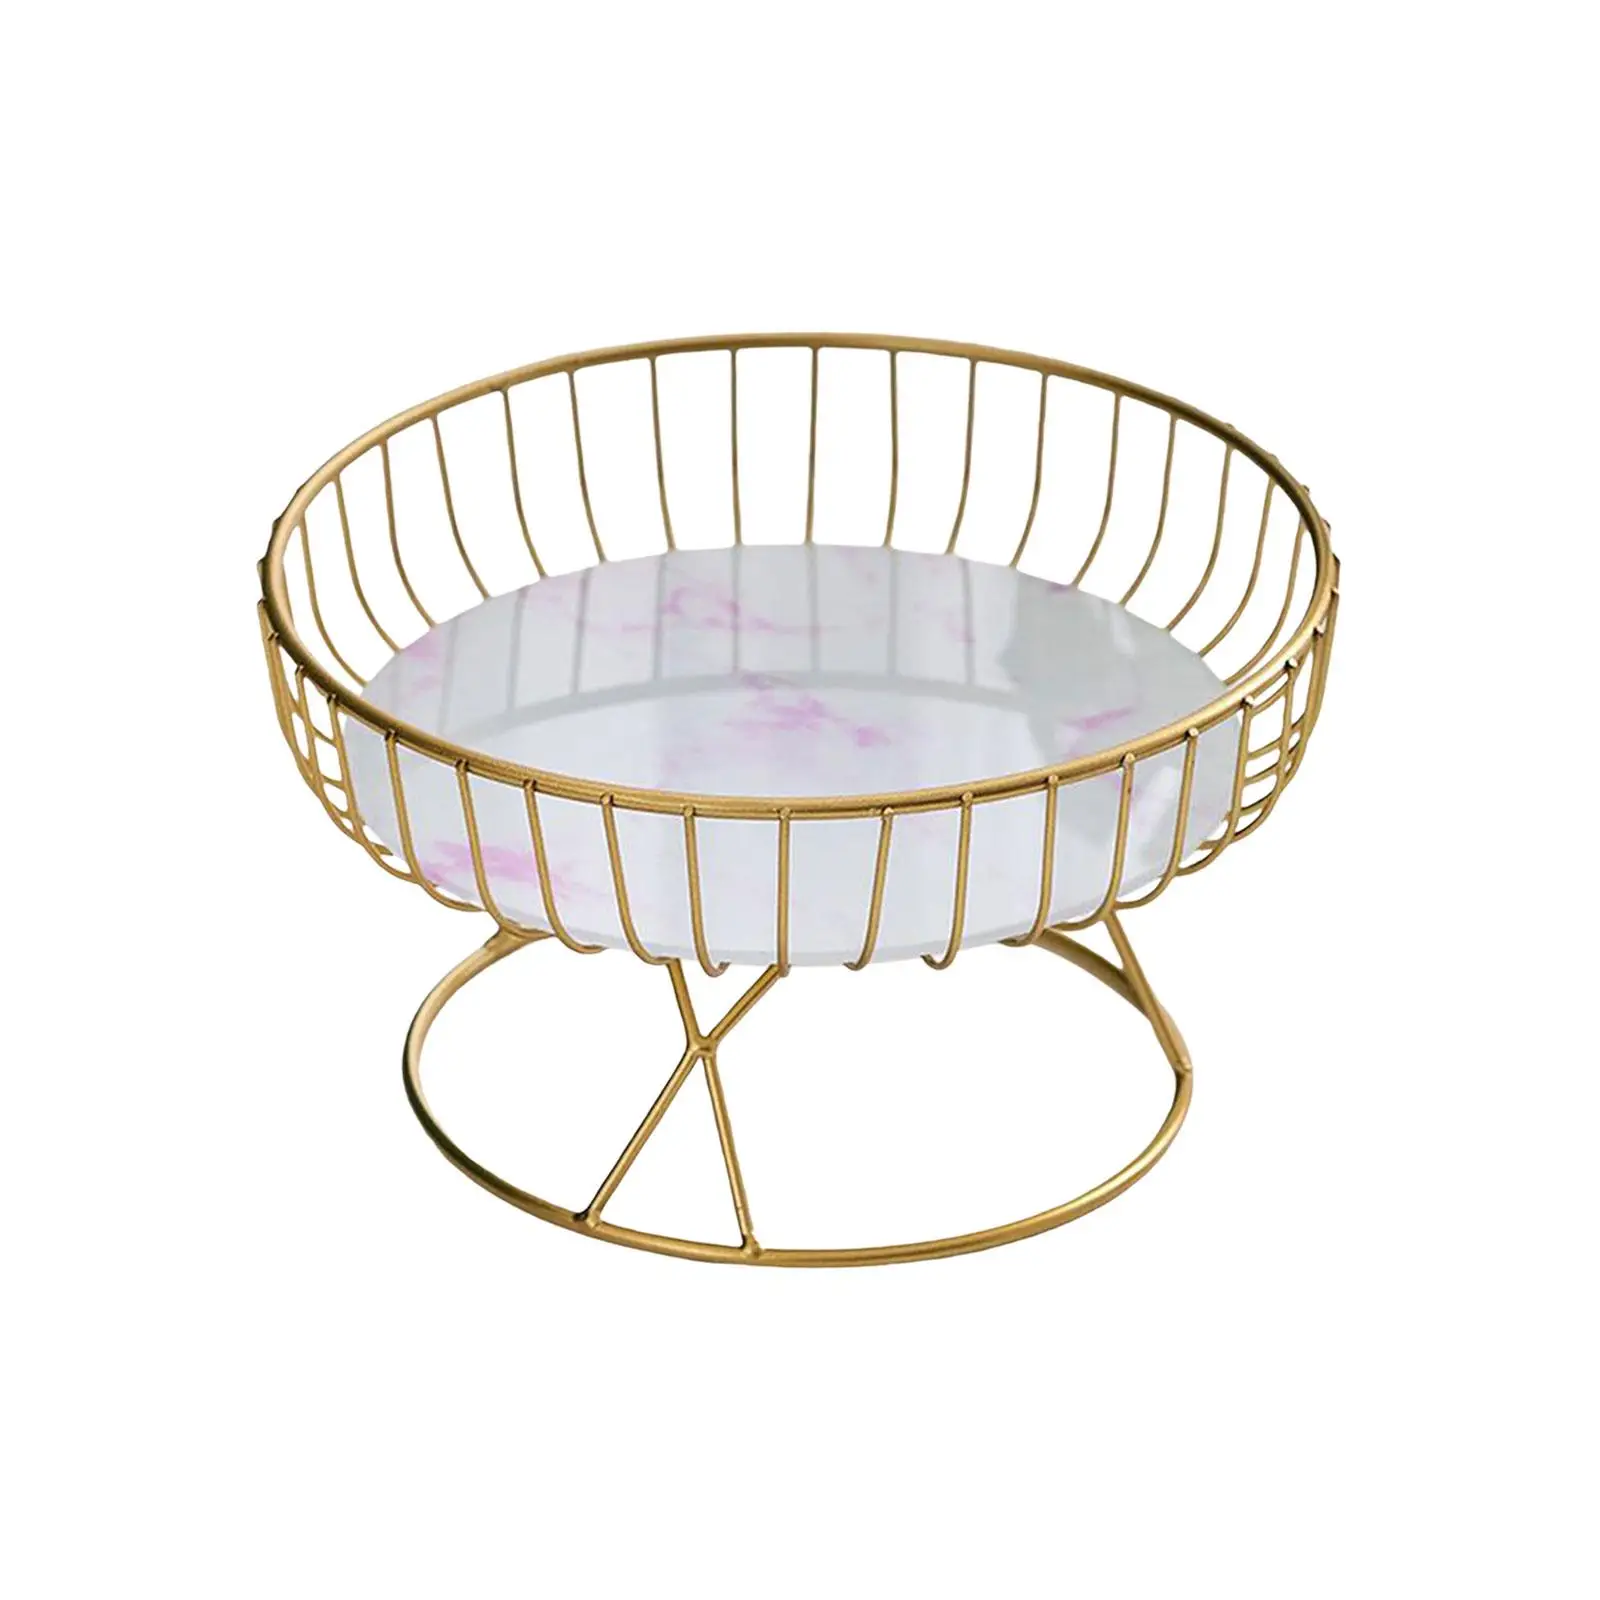 Golden Metal Iron Wire Round Fruit Basket Bowl for Vegetables Bread Table